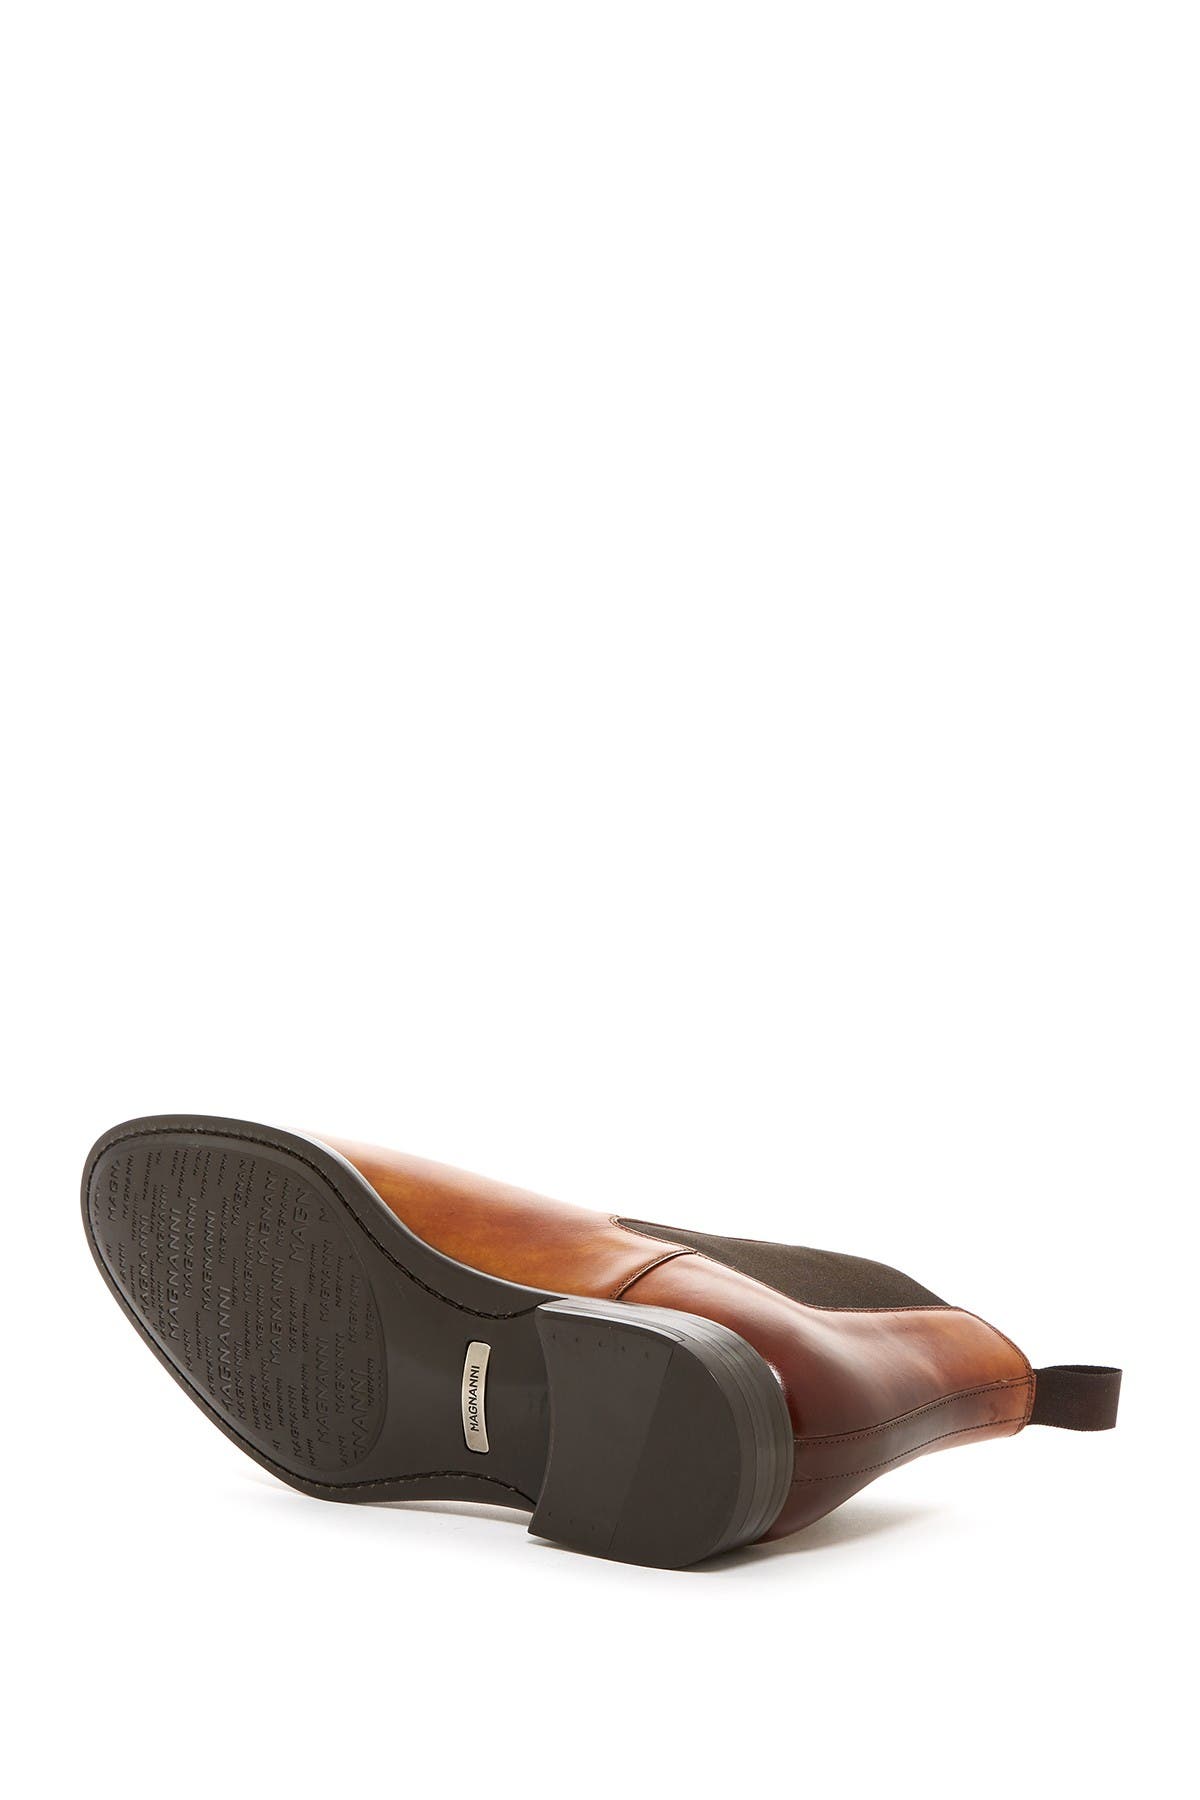 magnanni foster leather chelsea boot